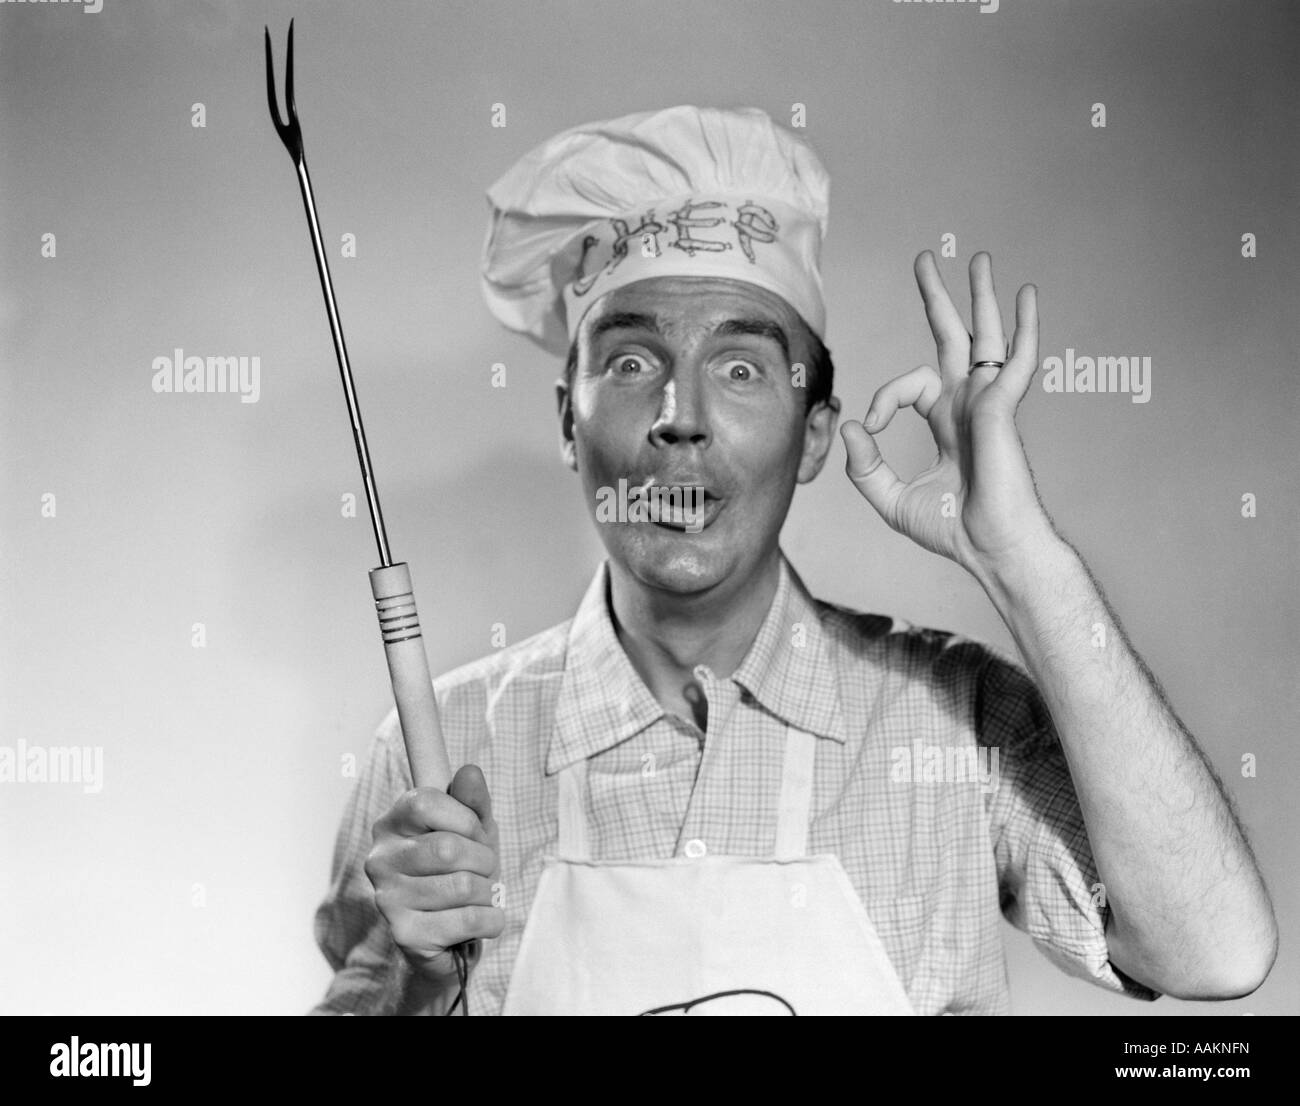 1950s 1960s MAN WEARING CHEF HAT HOLDING BARBECUE GRILLING FORK MAKING OKAY SIGN LOOKING AT CAMERA Stock Photo